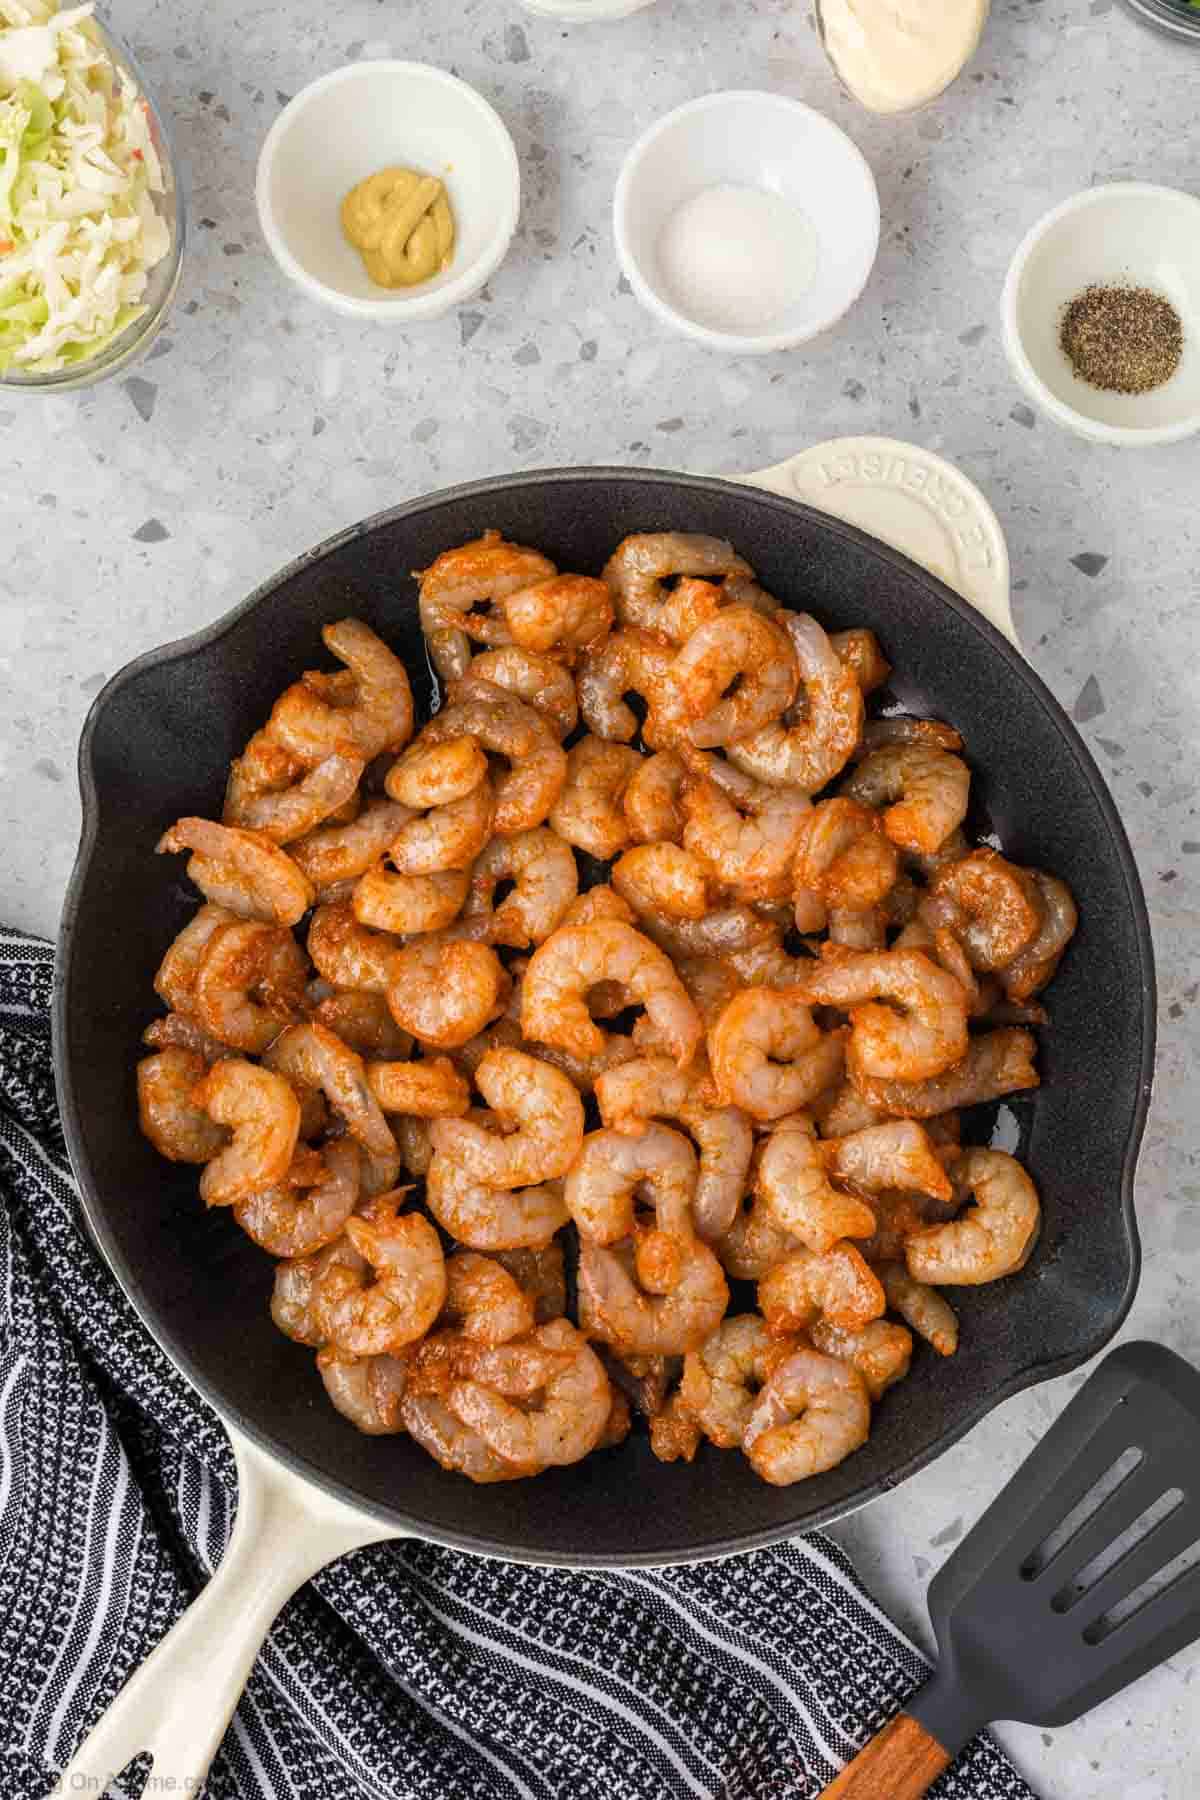 Seasoned shrimp in a cast iron skillet with a side of small bowls of mustard, salt and pepper